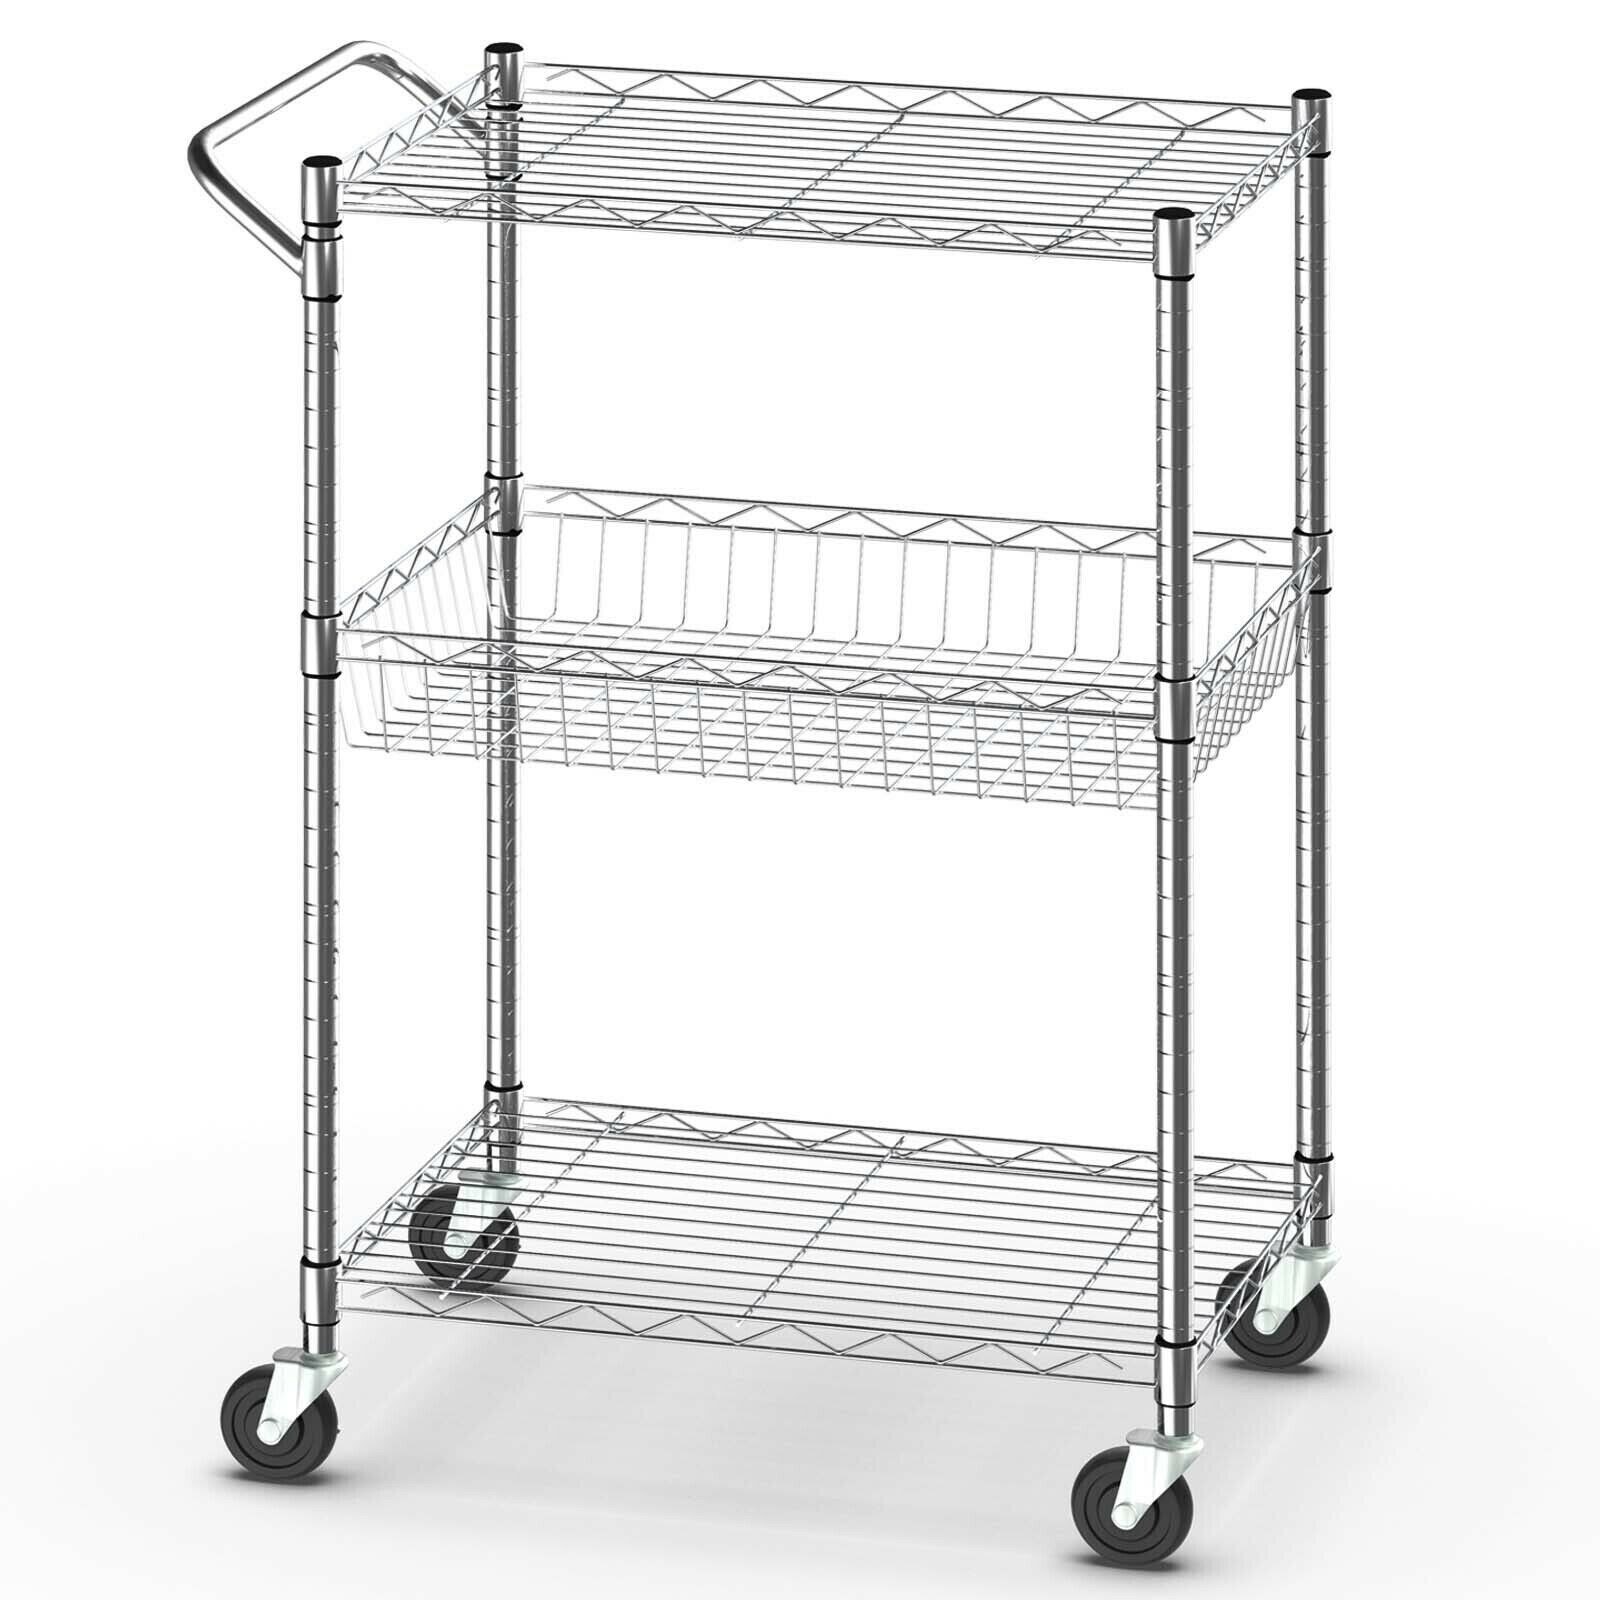 https://ak1.ostkcdn.com/images/products/is/images/direct/7b7fe3f0316518c779d8f36e2e94a1d60925ebc1/3-Tier-Utility-Cart-Heavy-Duty-Wire-Rolling-Cart-with-Handle-Bar-Storage-Trolley.jpg